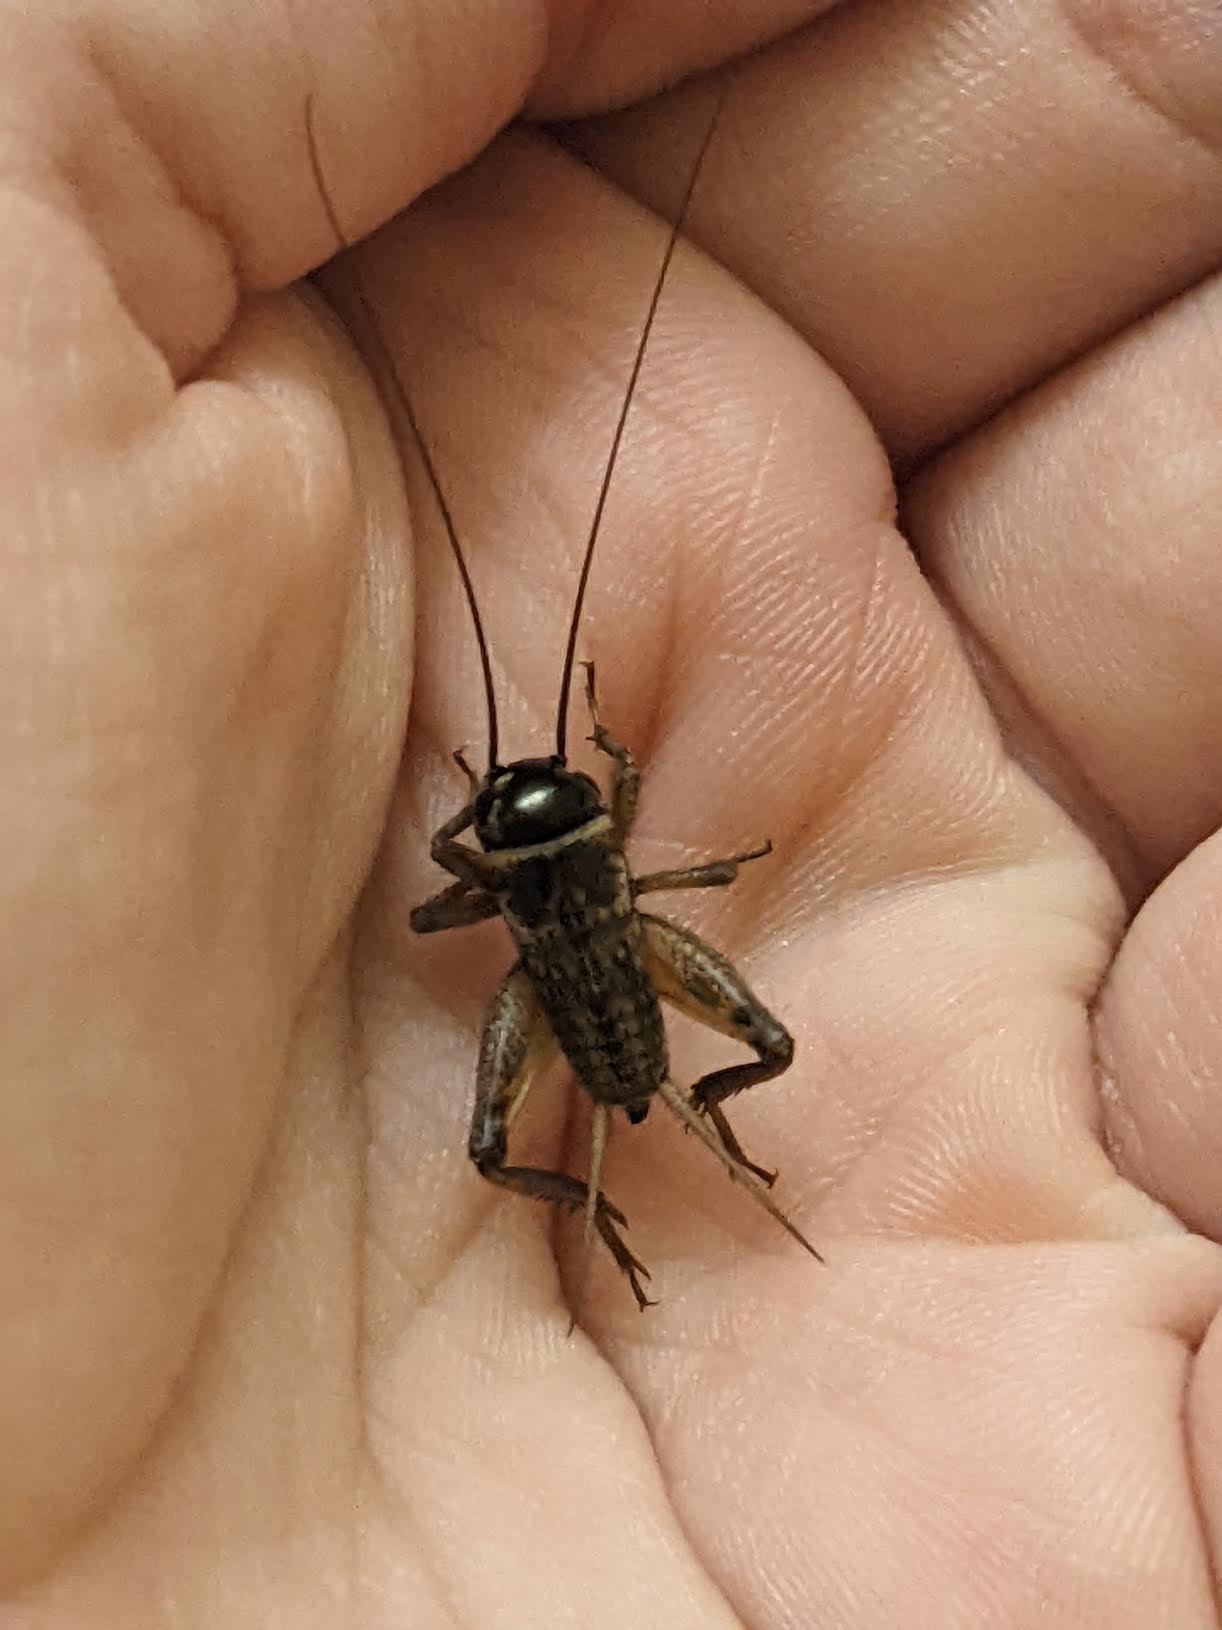 the cricket in question